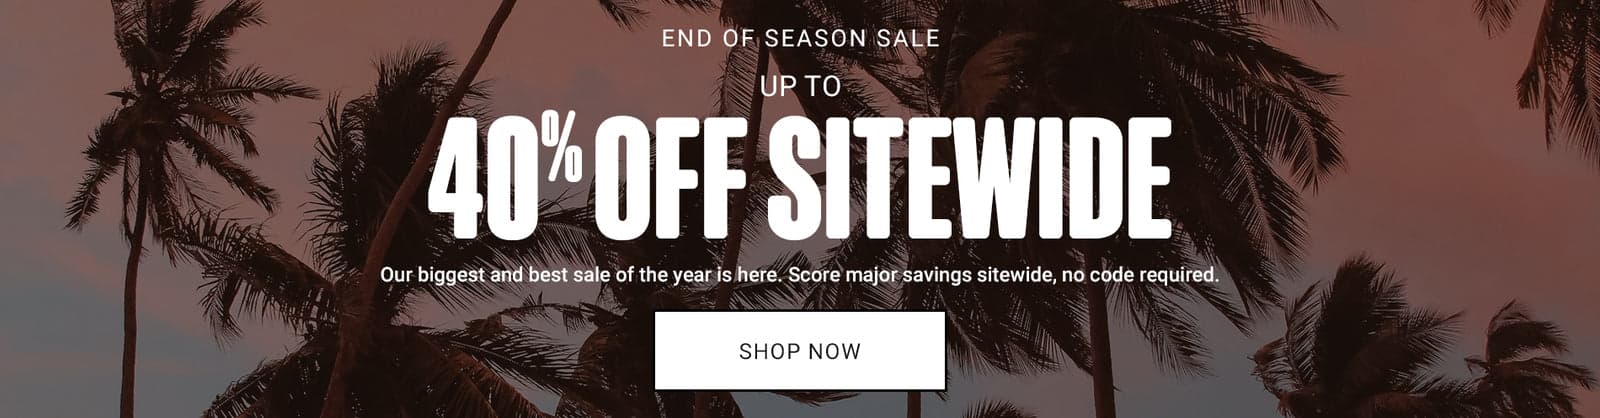 Hurley - Up to 40% Off Sitewide!